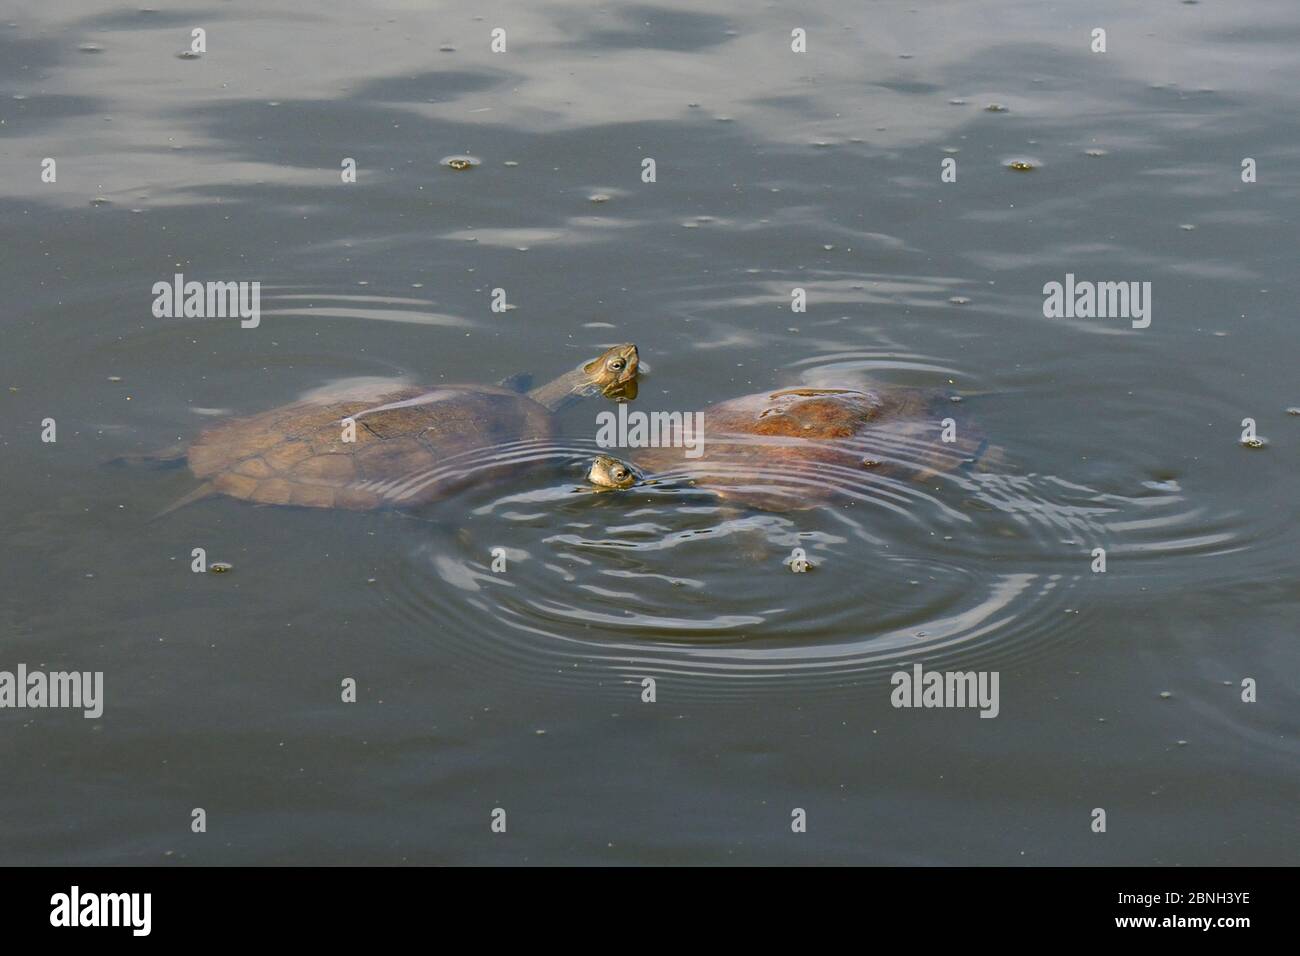 Two Western Caspian pond turtles / Balkan stripe-necked terrapins (Mauremys caspica rivulata) swimming in a pond with their heads above water, Isle of Stock Photo